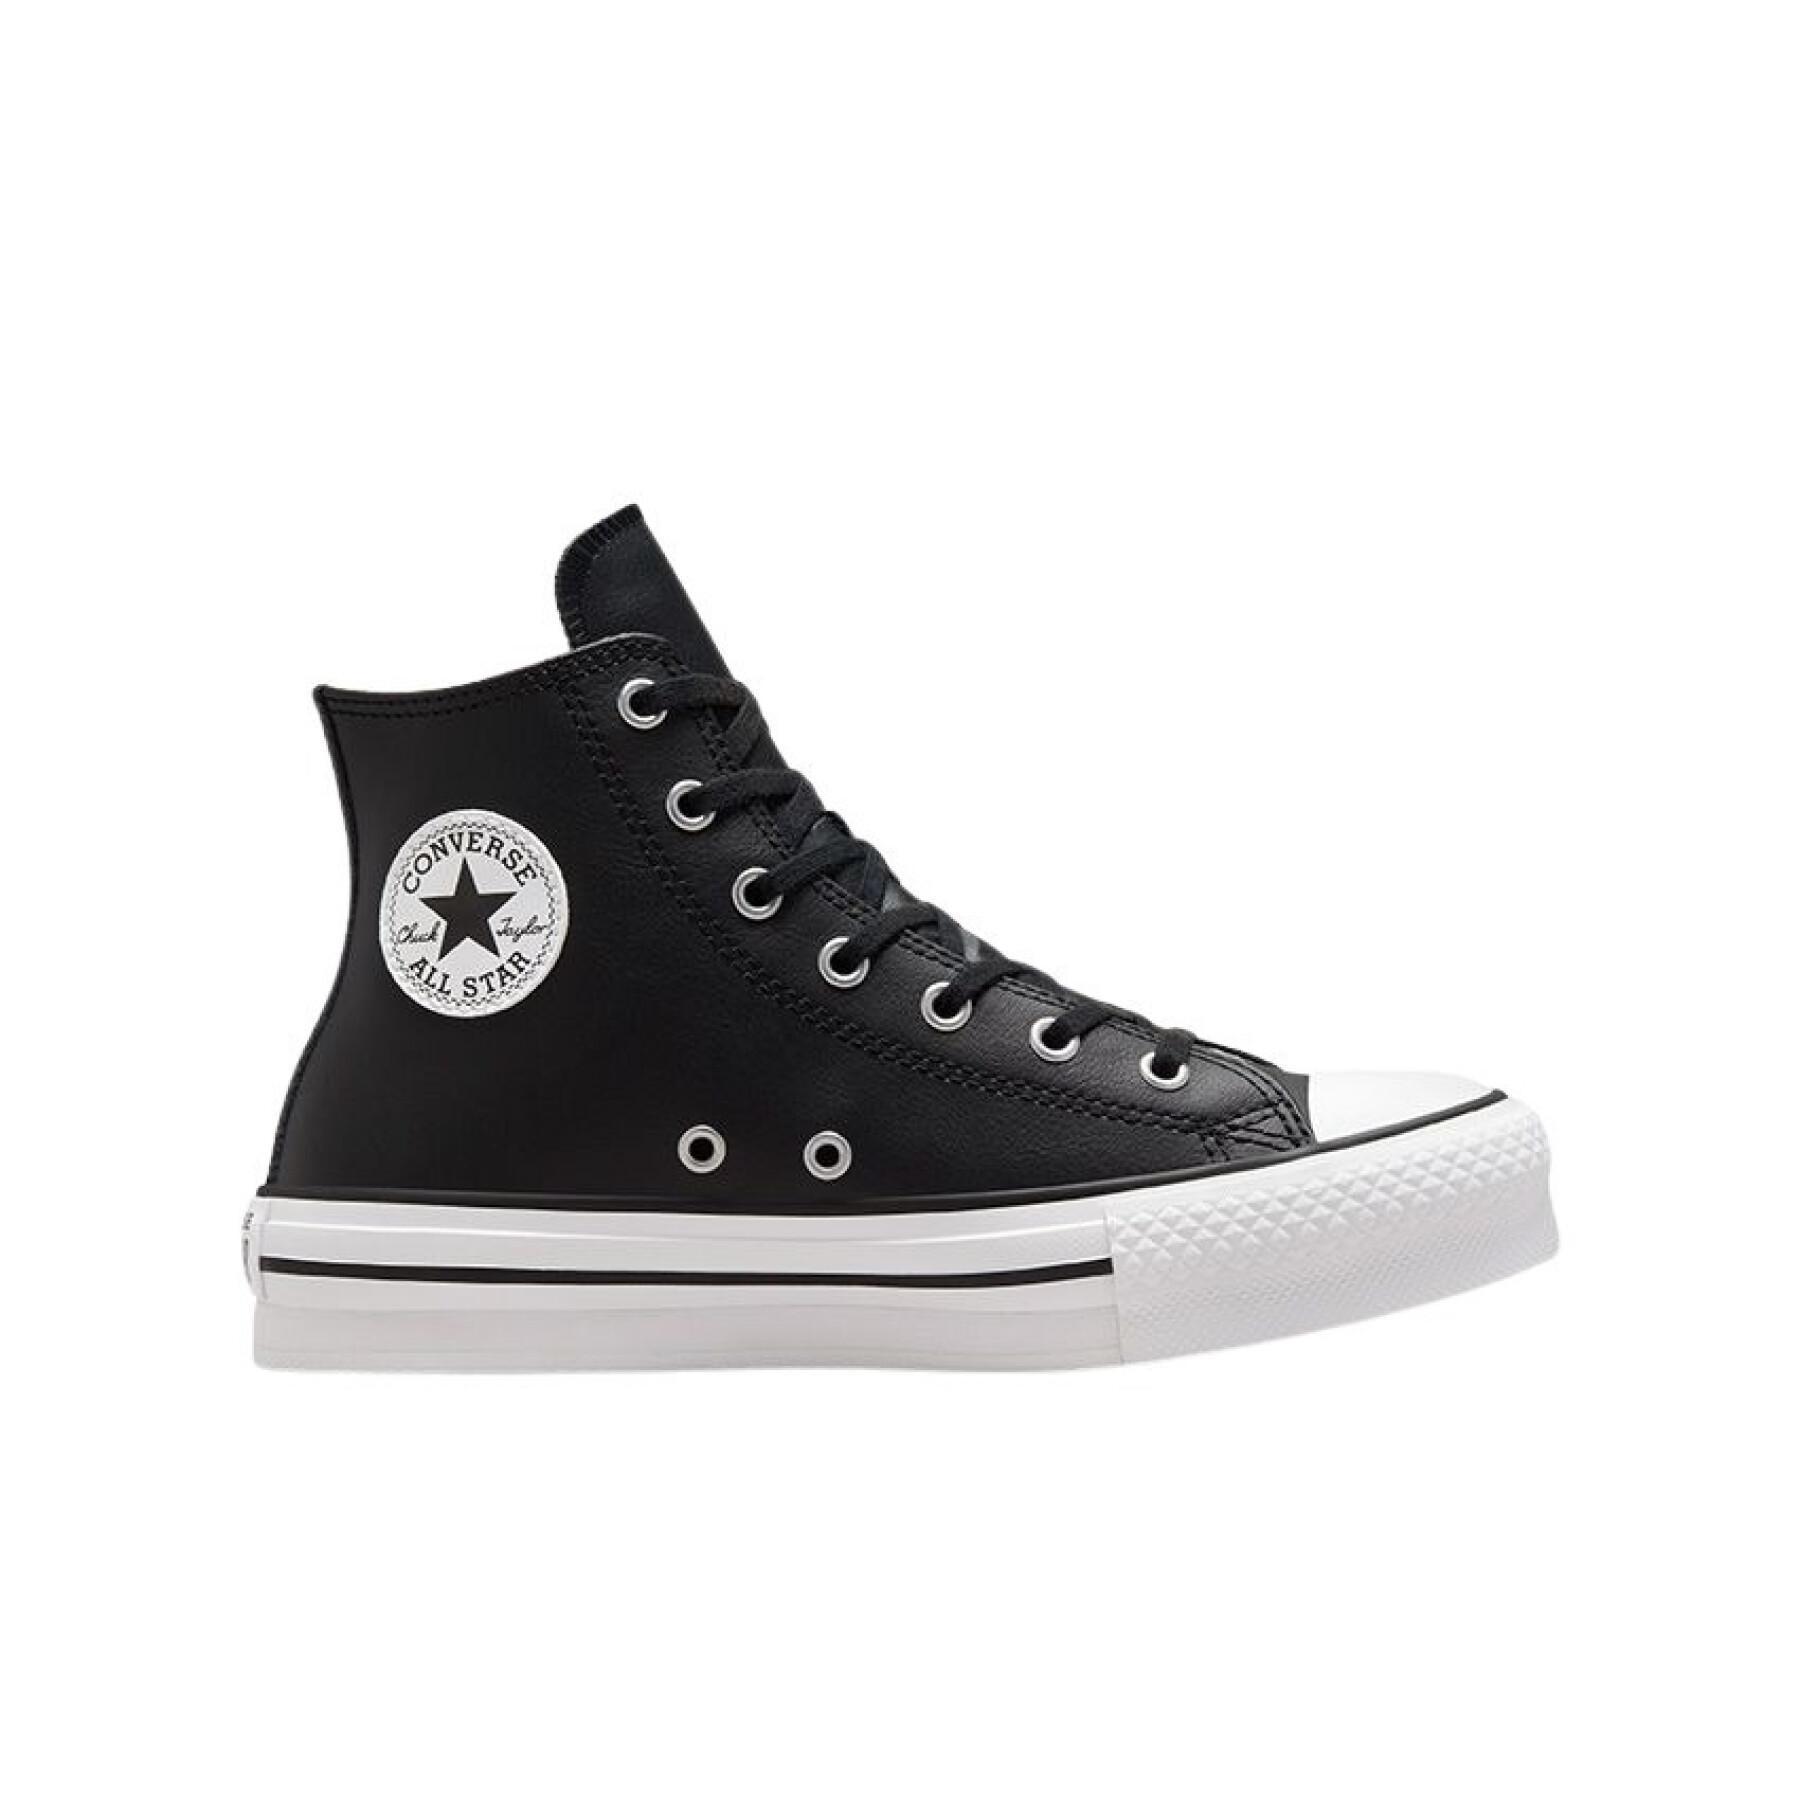 Women's sneakers Converse All Star Lift